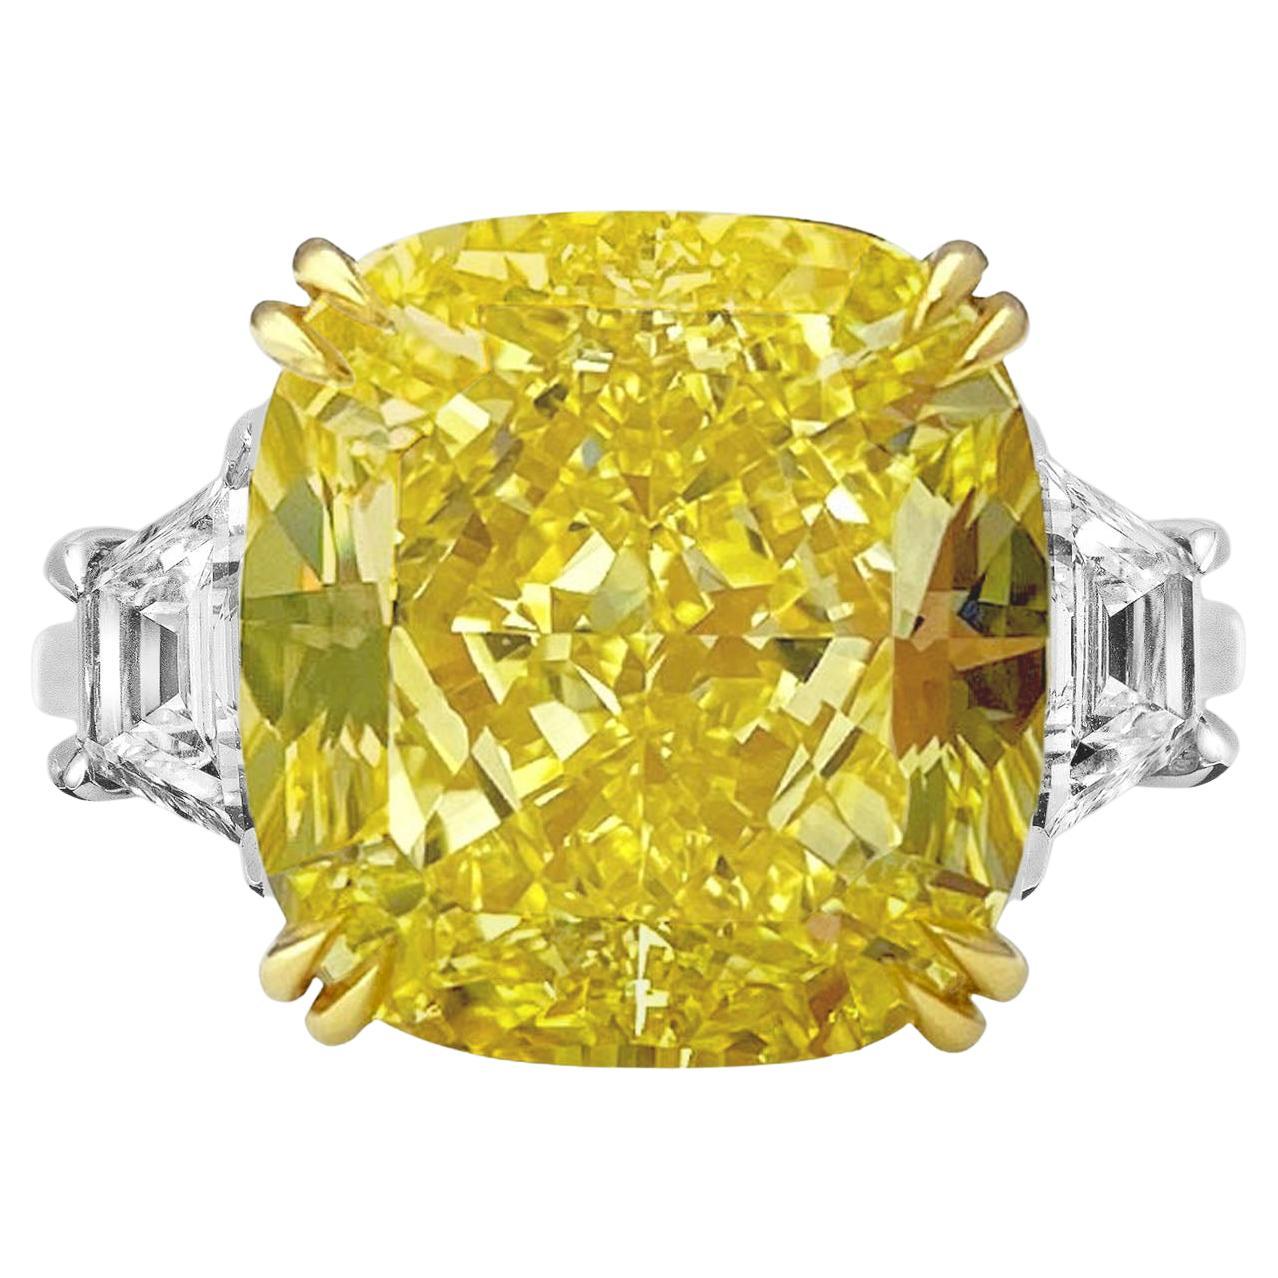 EXCEPTIONAL GIA Certified 23 Carat Fancy VIVID Yellow Diamond Ring